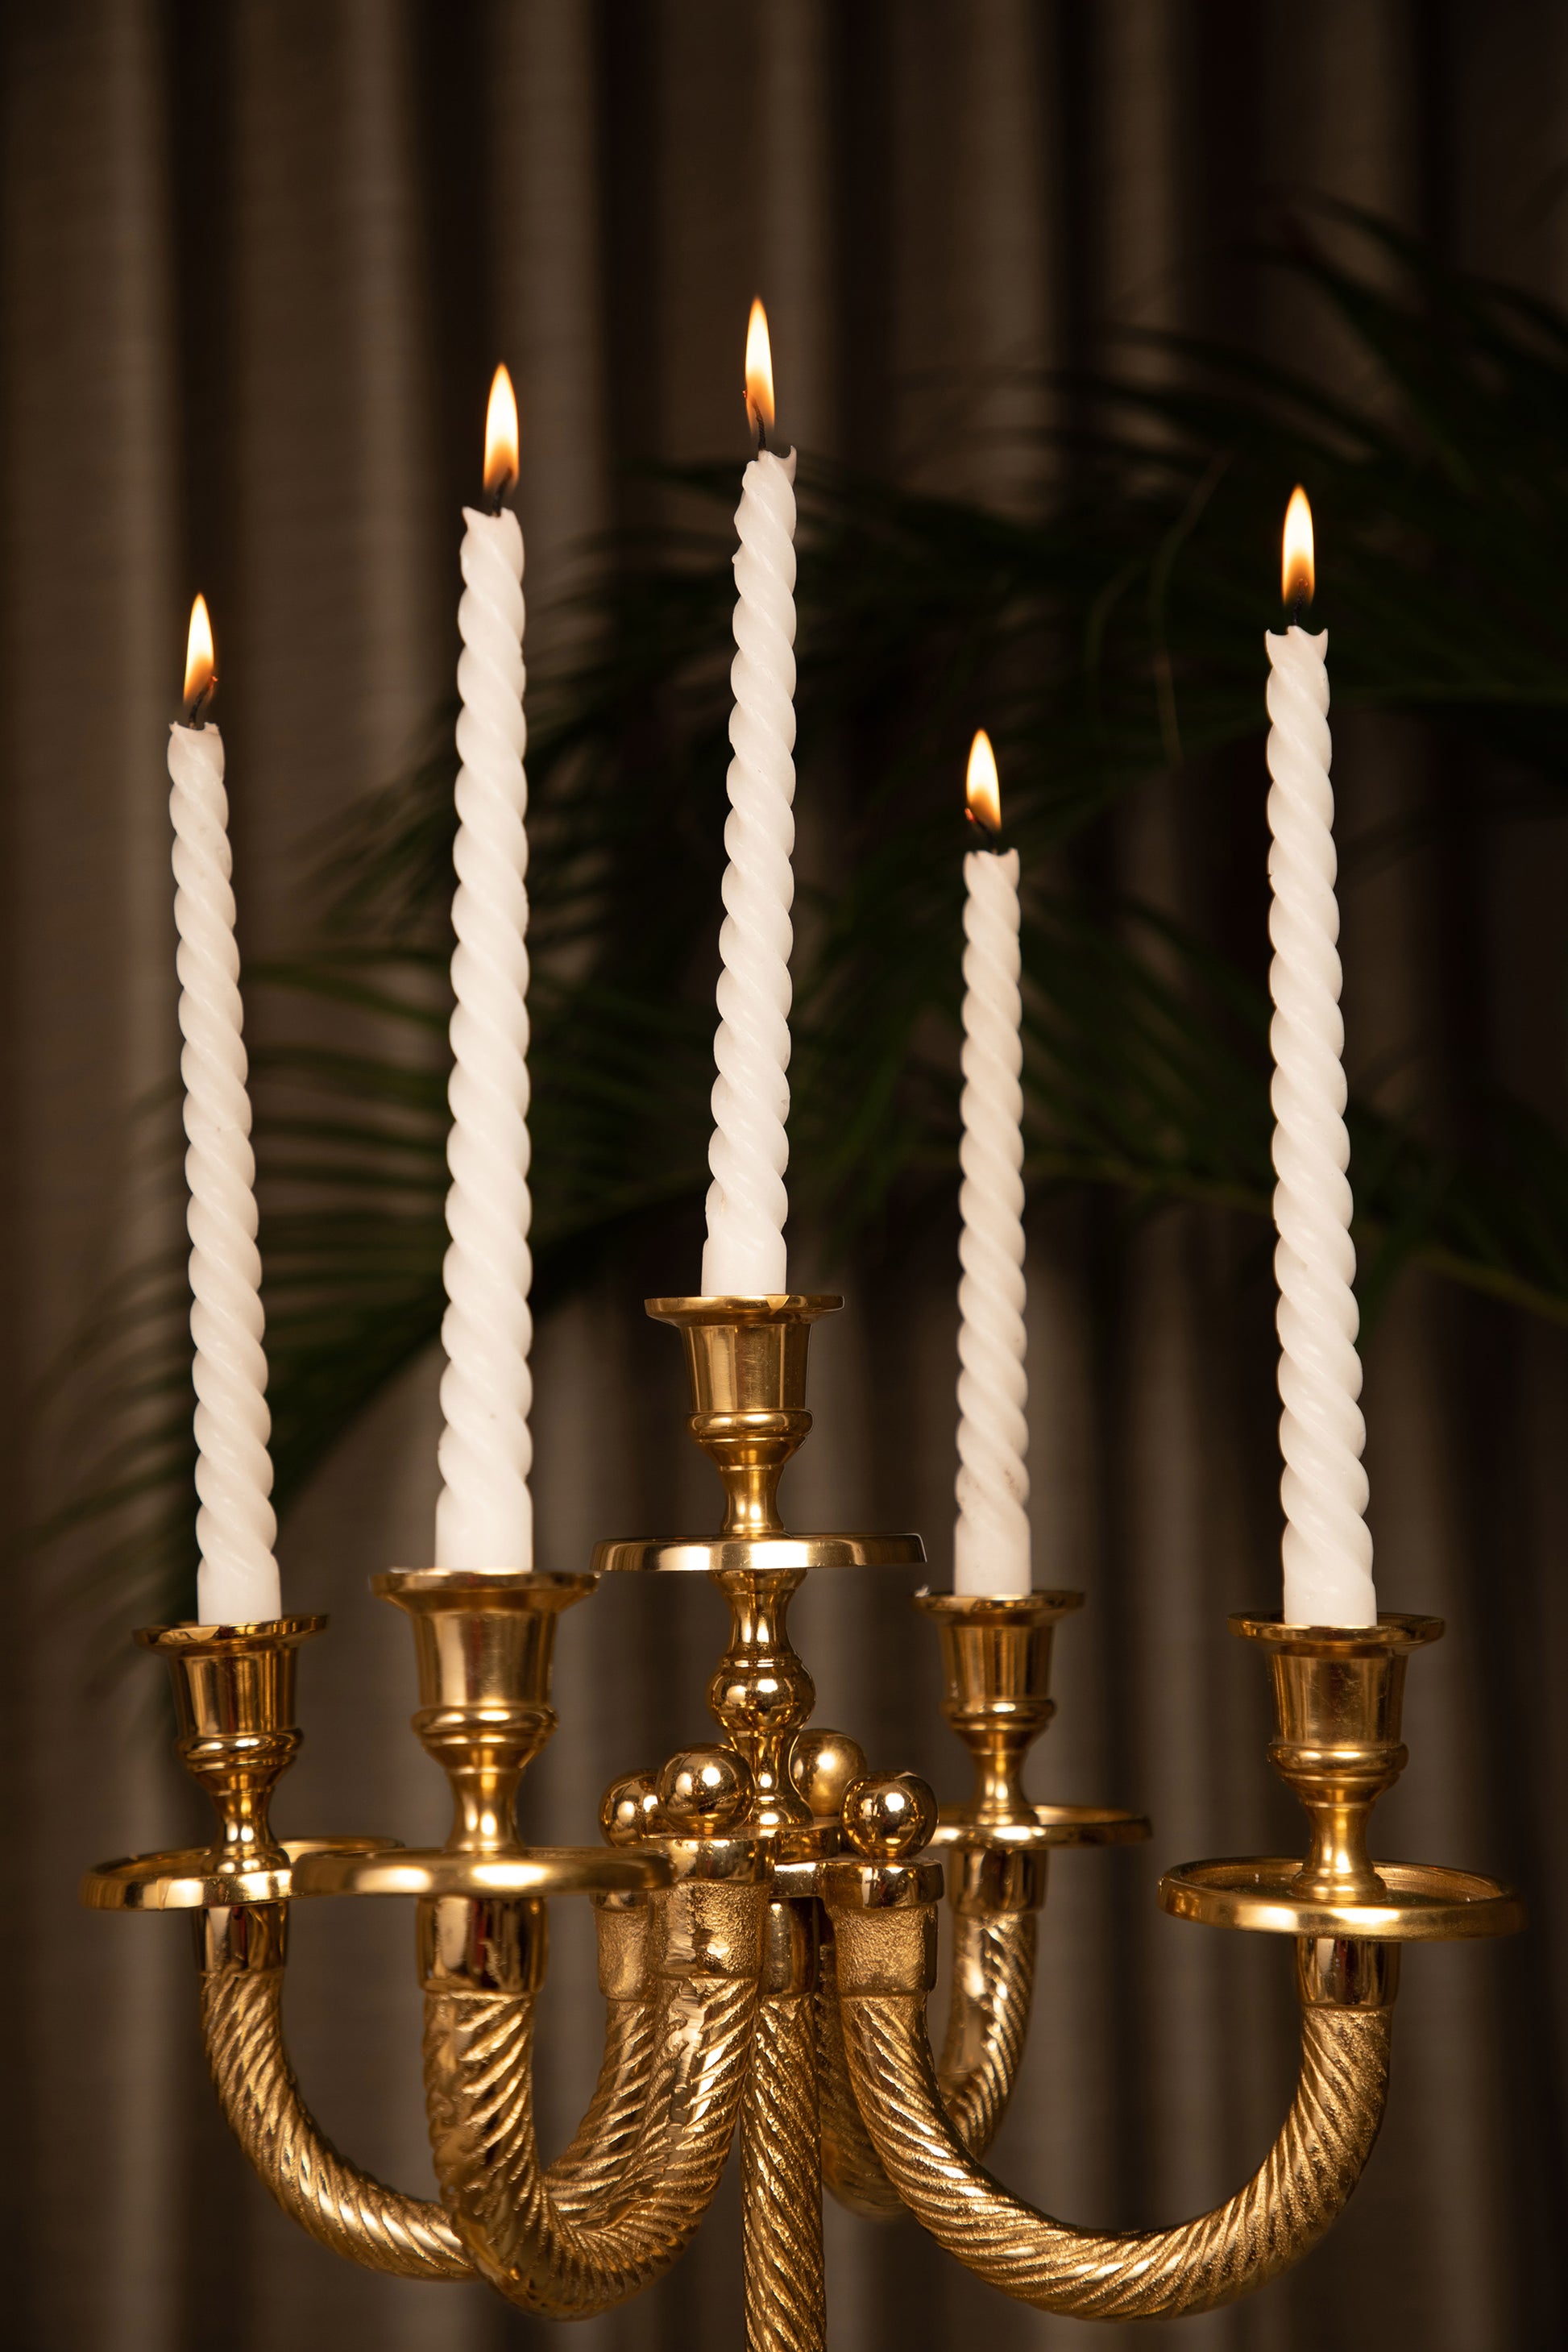 The candelabra boasts a classic and timeless design, making it a perfect fit for a wide range of interior styles, from traditional to modern.